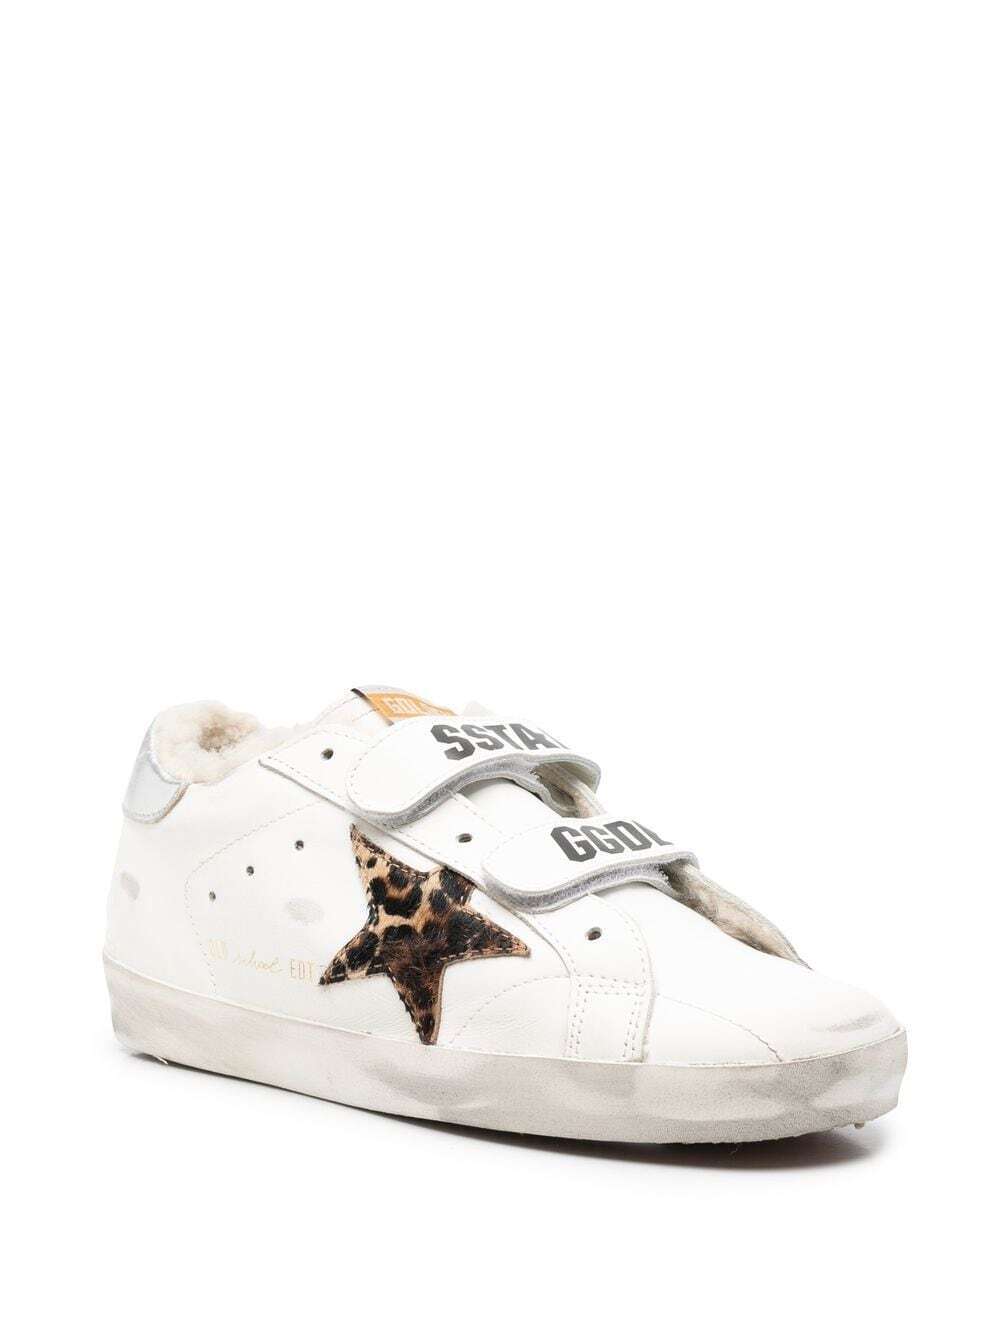 Golden Goose Old School Sneakers GWF00111.F003348 Size IT 40 | KATH STORE